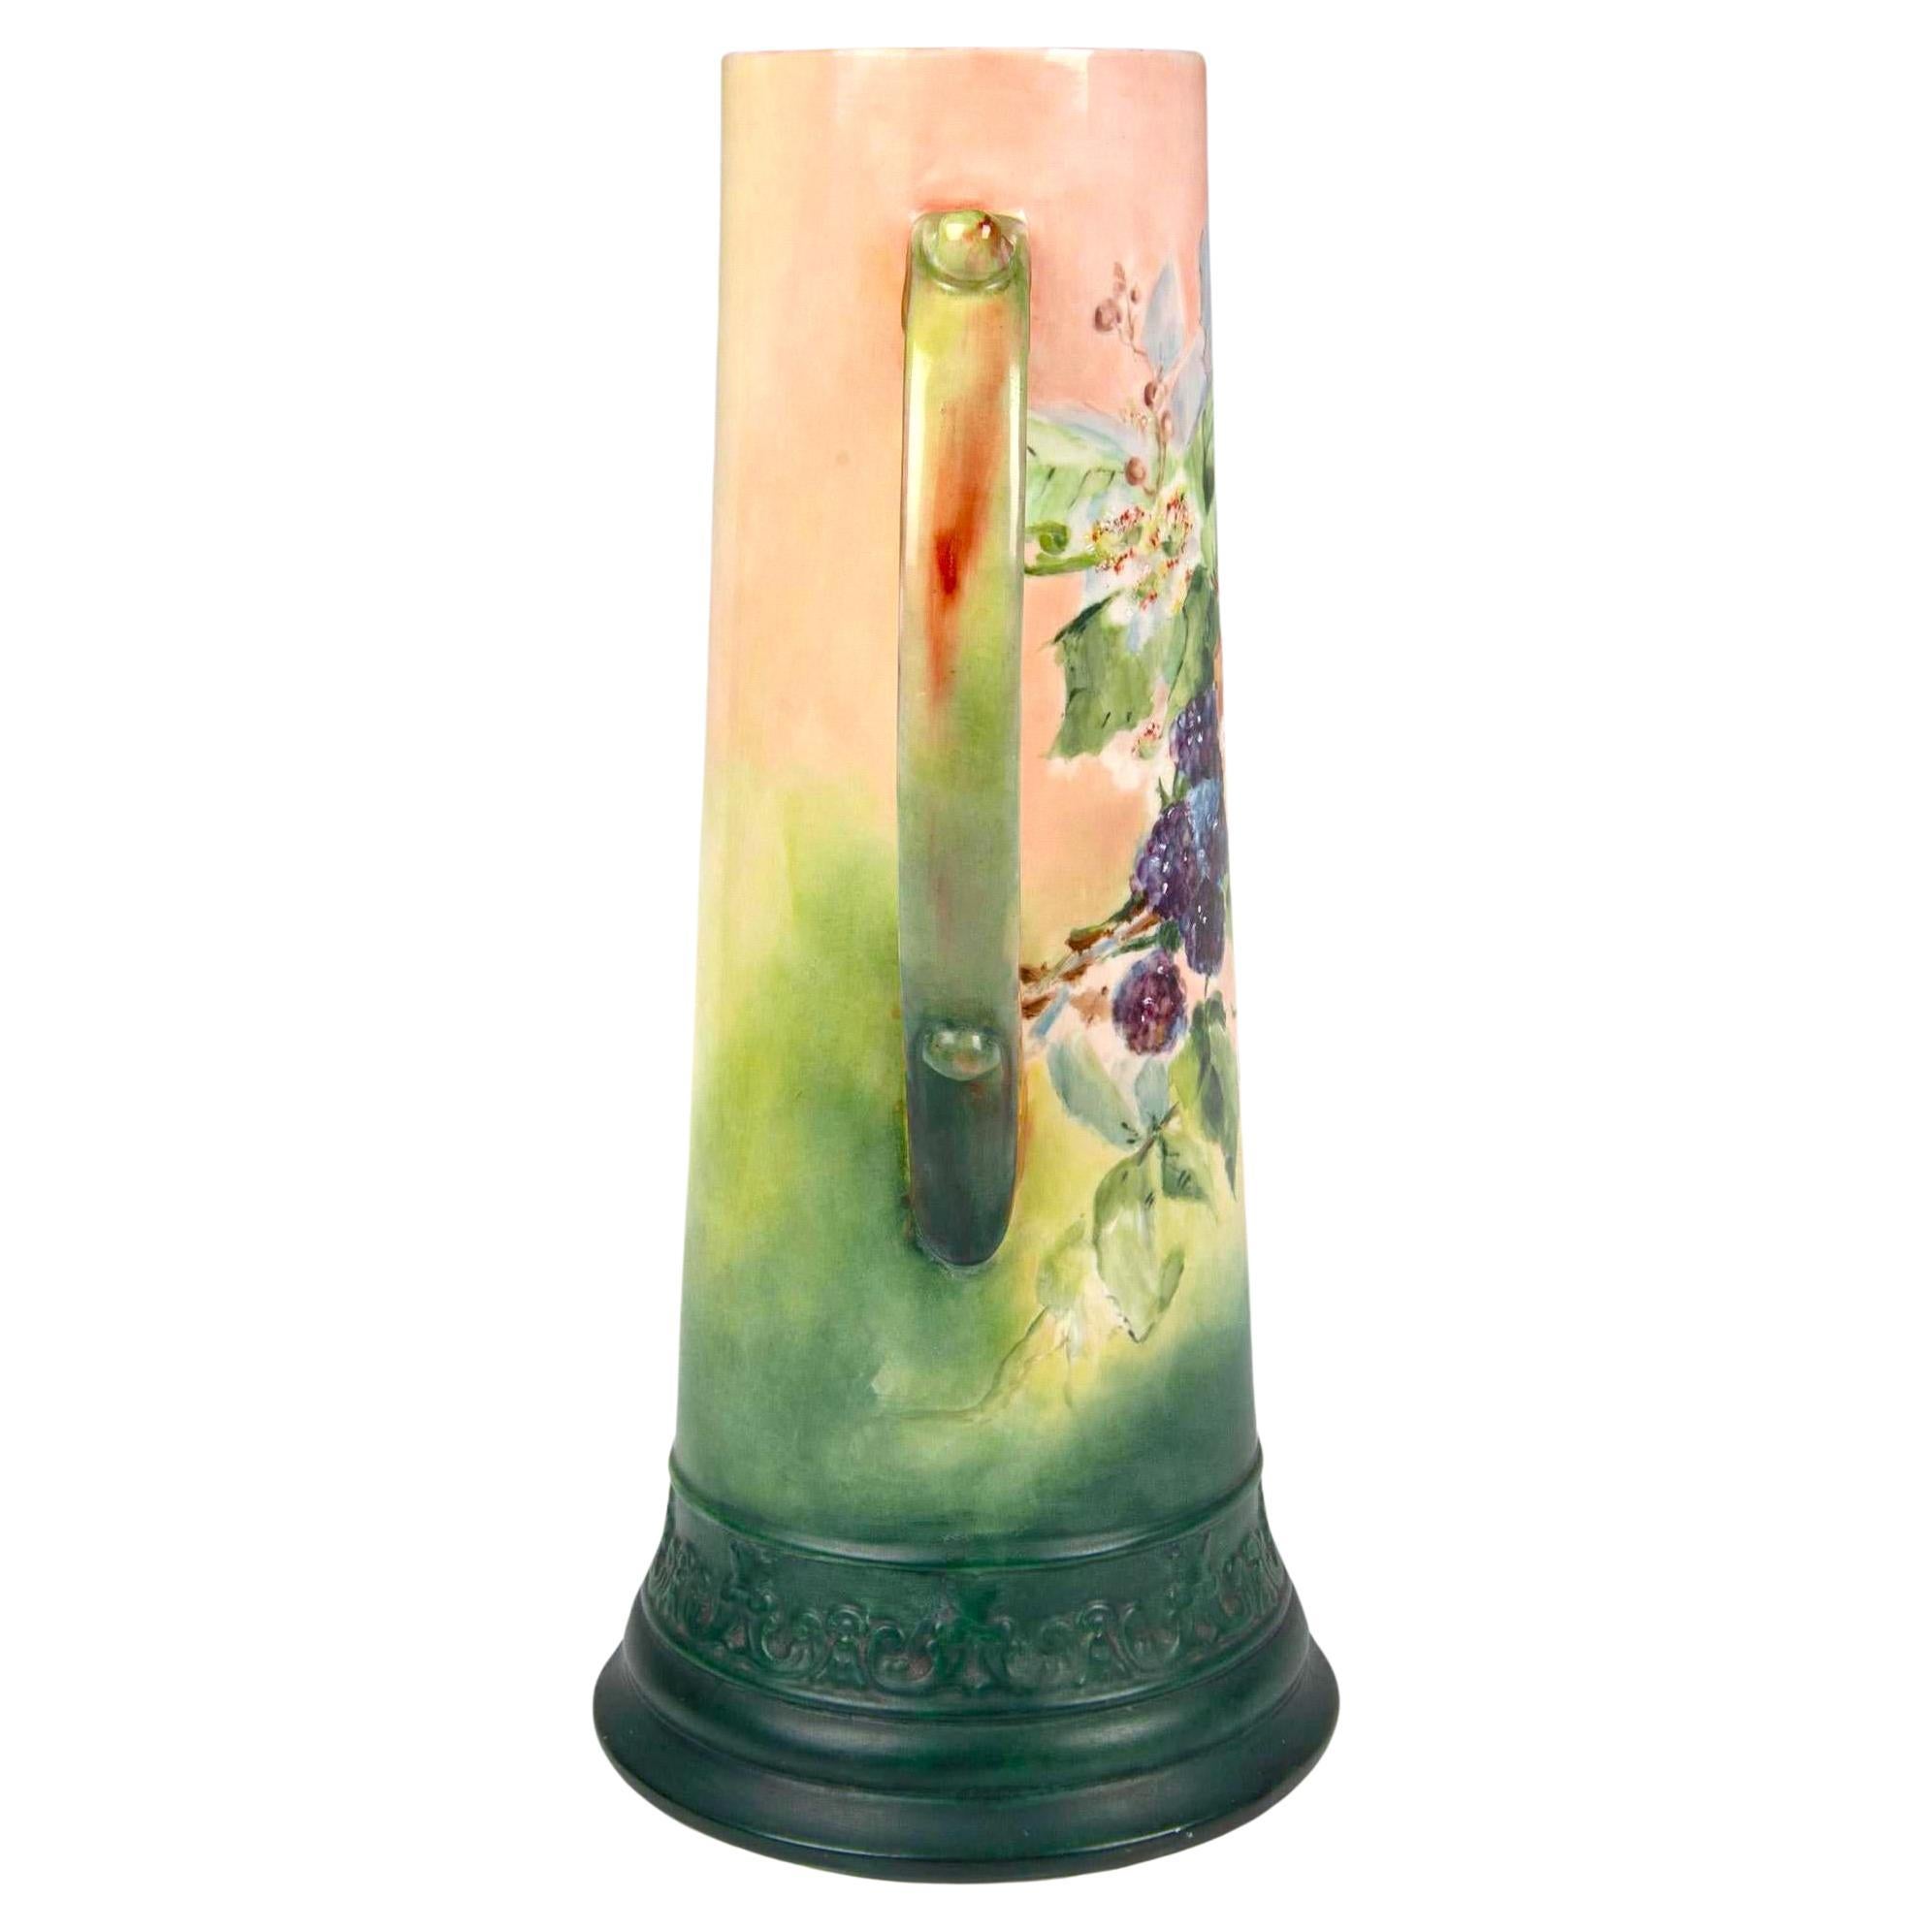 Experience the beauty and elegance of this early 20th-century North American white porcelain tankard from Belleek. This stunning piece is meticulously crafted and hand-painted with vibrant green and grapes detail, bringing a touch of nature's charm